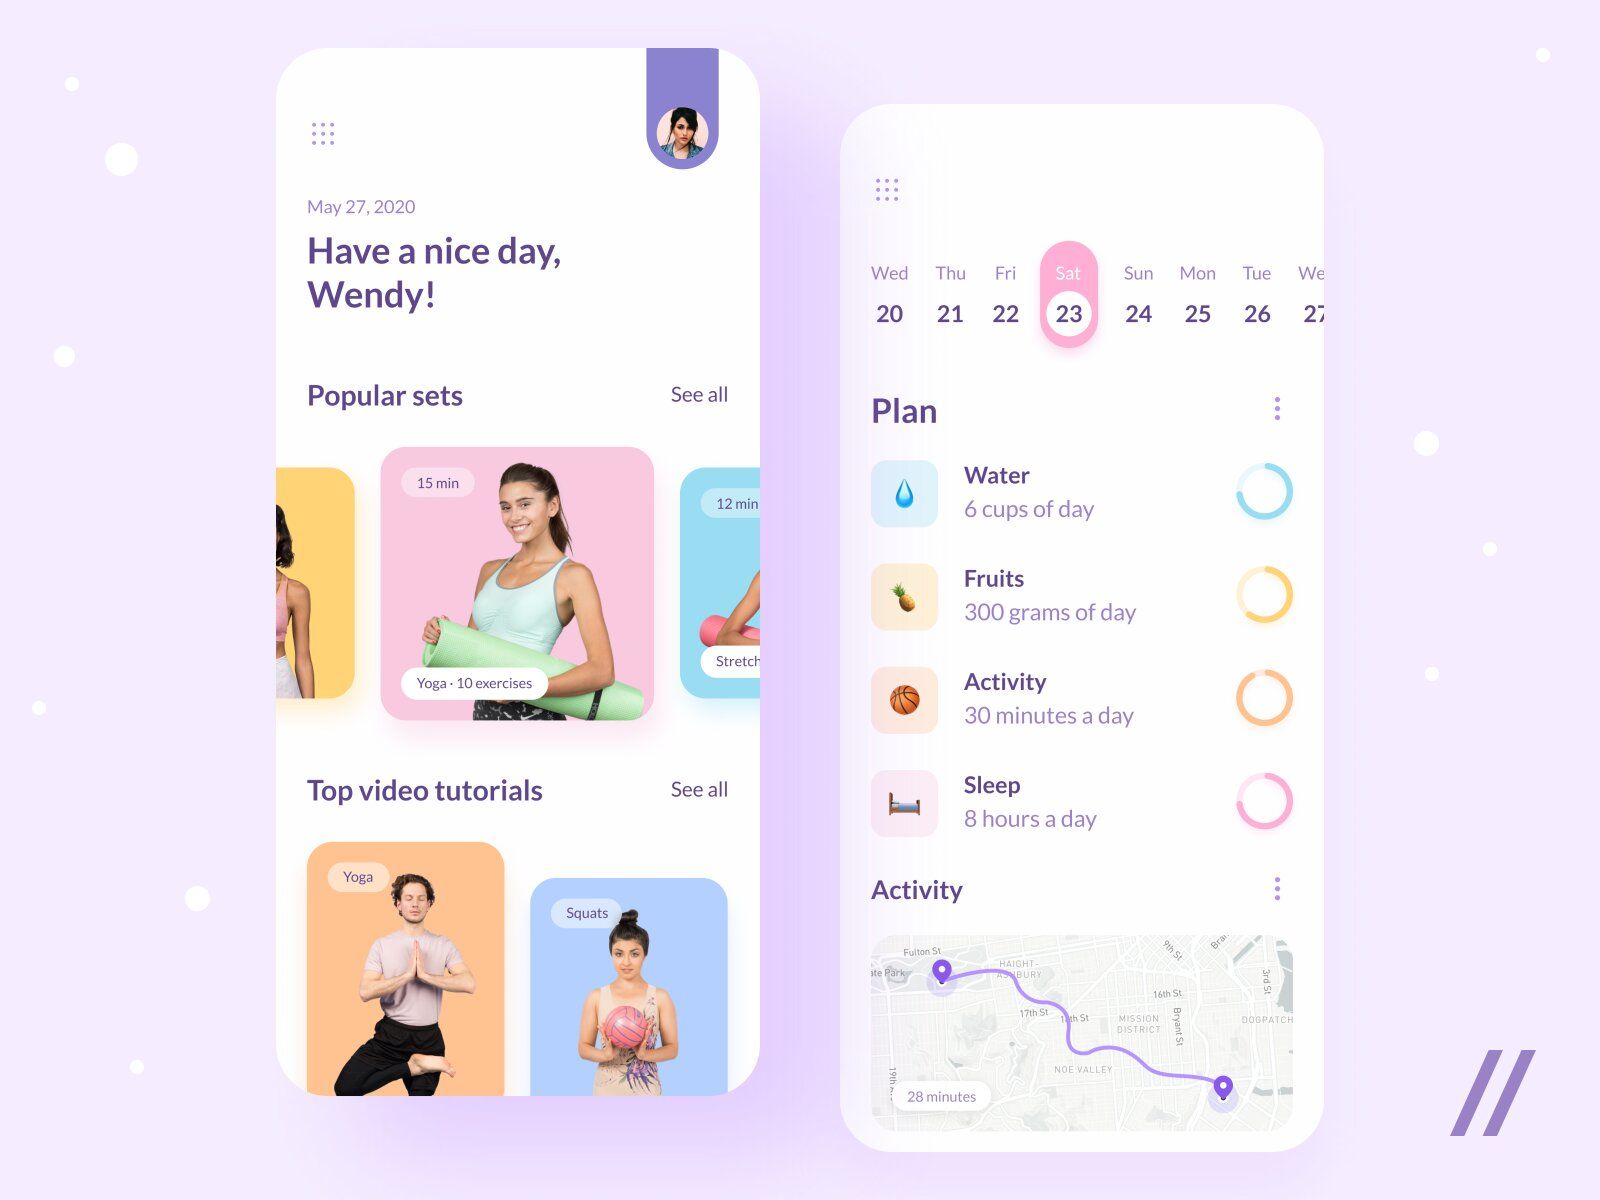 You can mix different features to create a unique fitness experience for your members (*image by [Purrweb UI](https://dribbble.com/purrwebui){ rel="nofollow" target="_blank" .default-md}*)